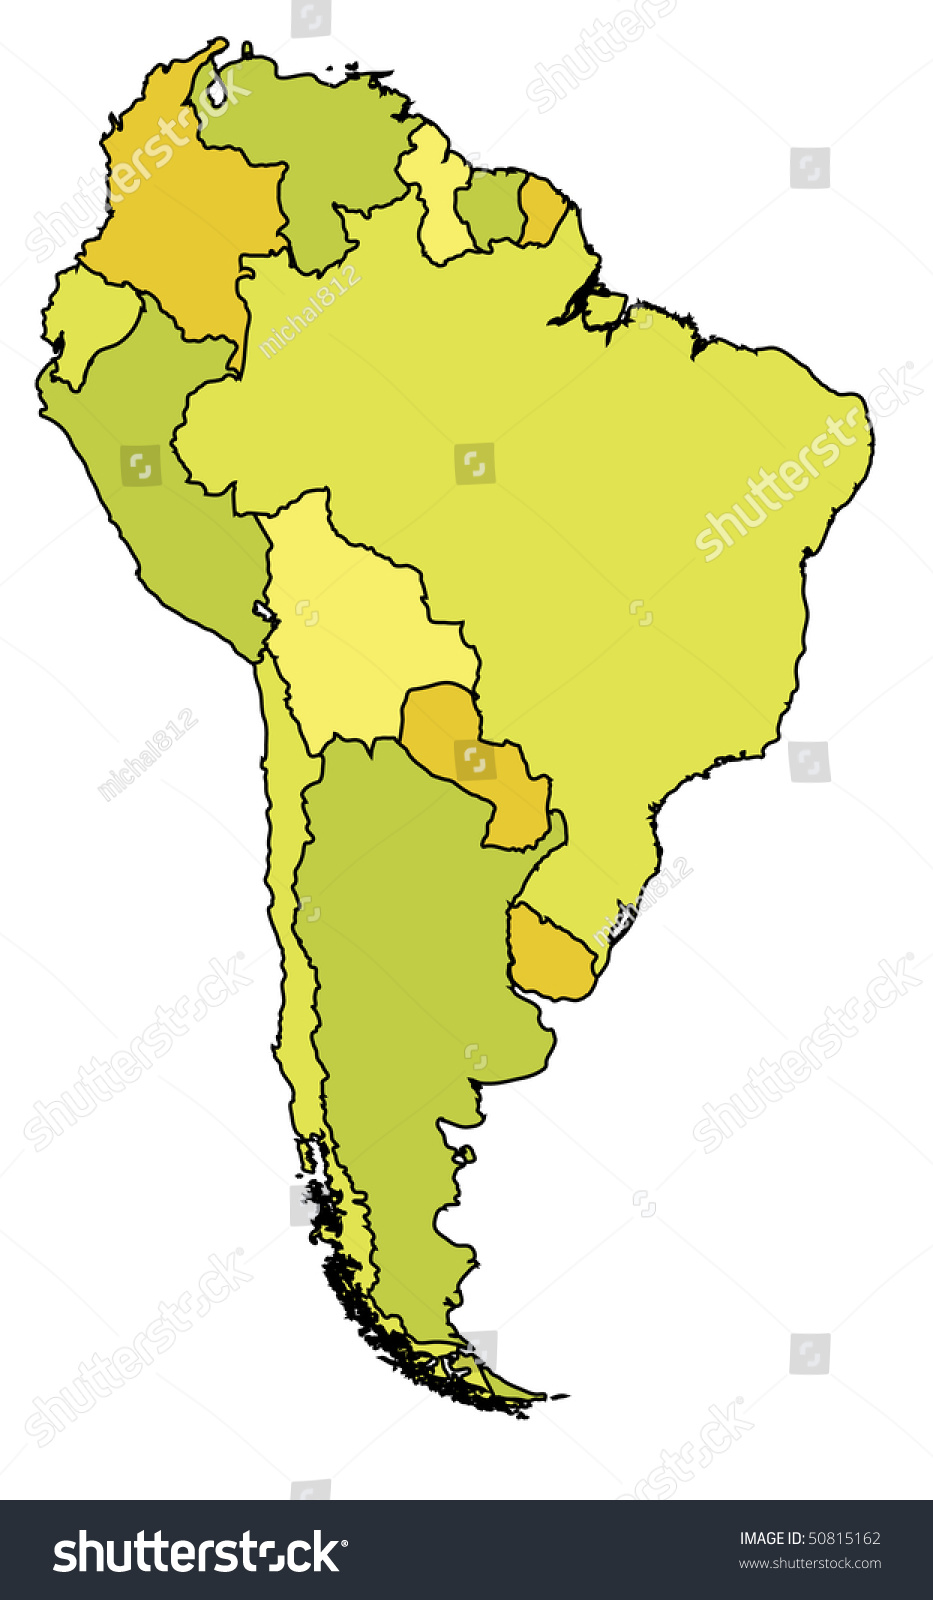 Political Map South America Country Territories Stock Vector Royalty Free 50815162 Shutterstock 7539